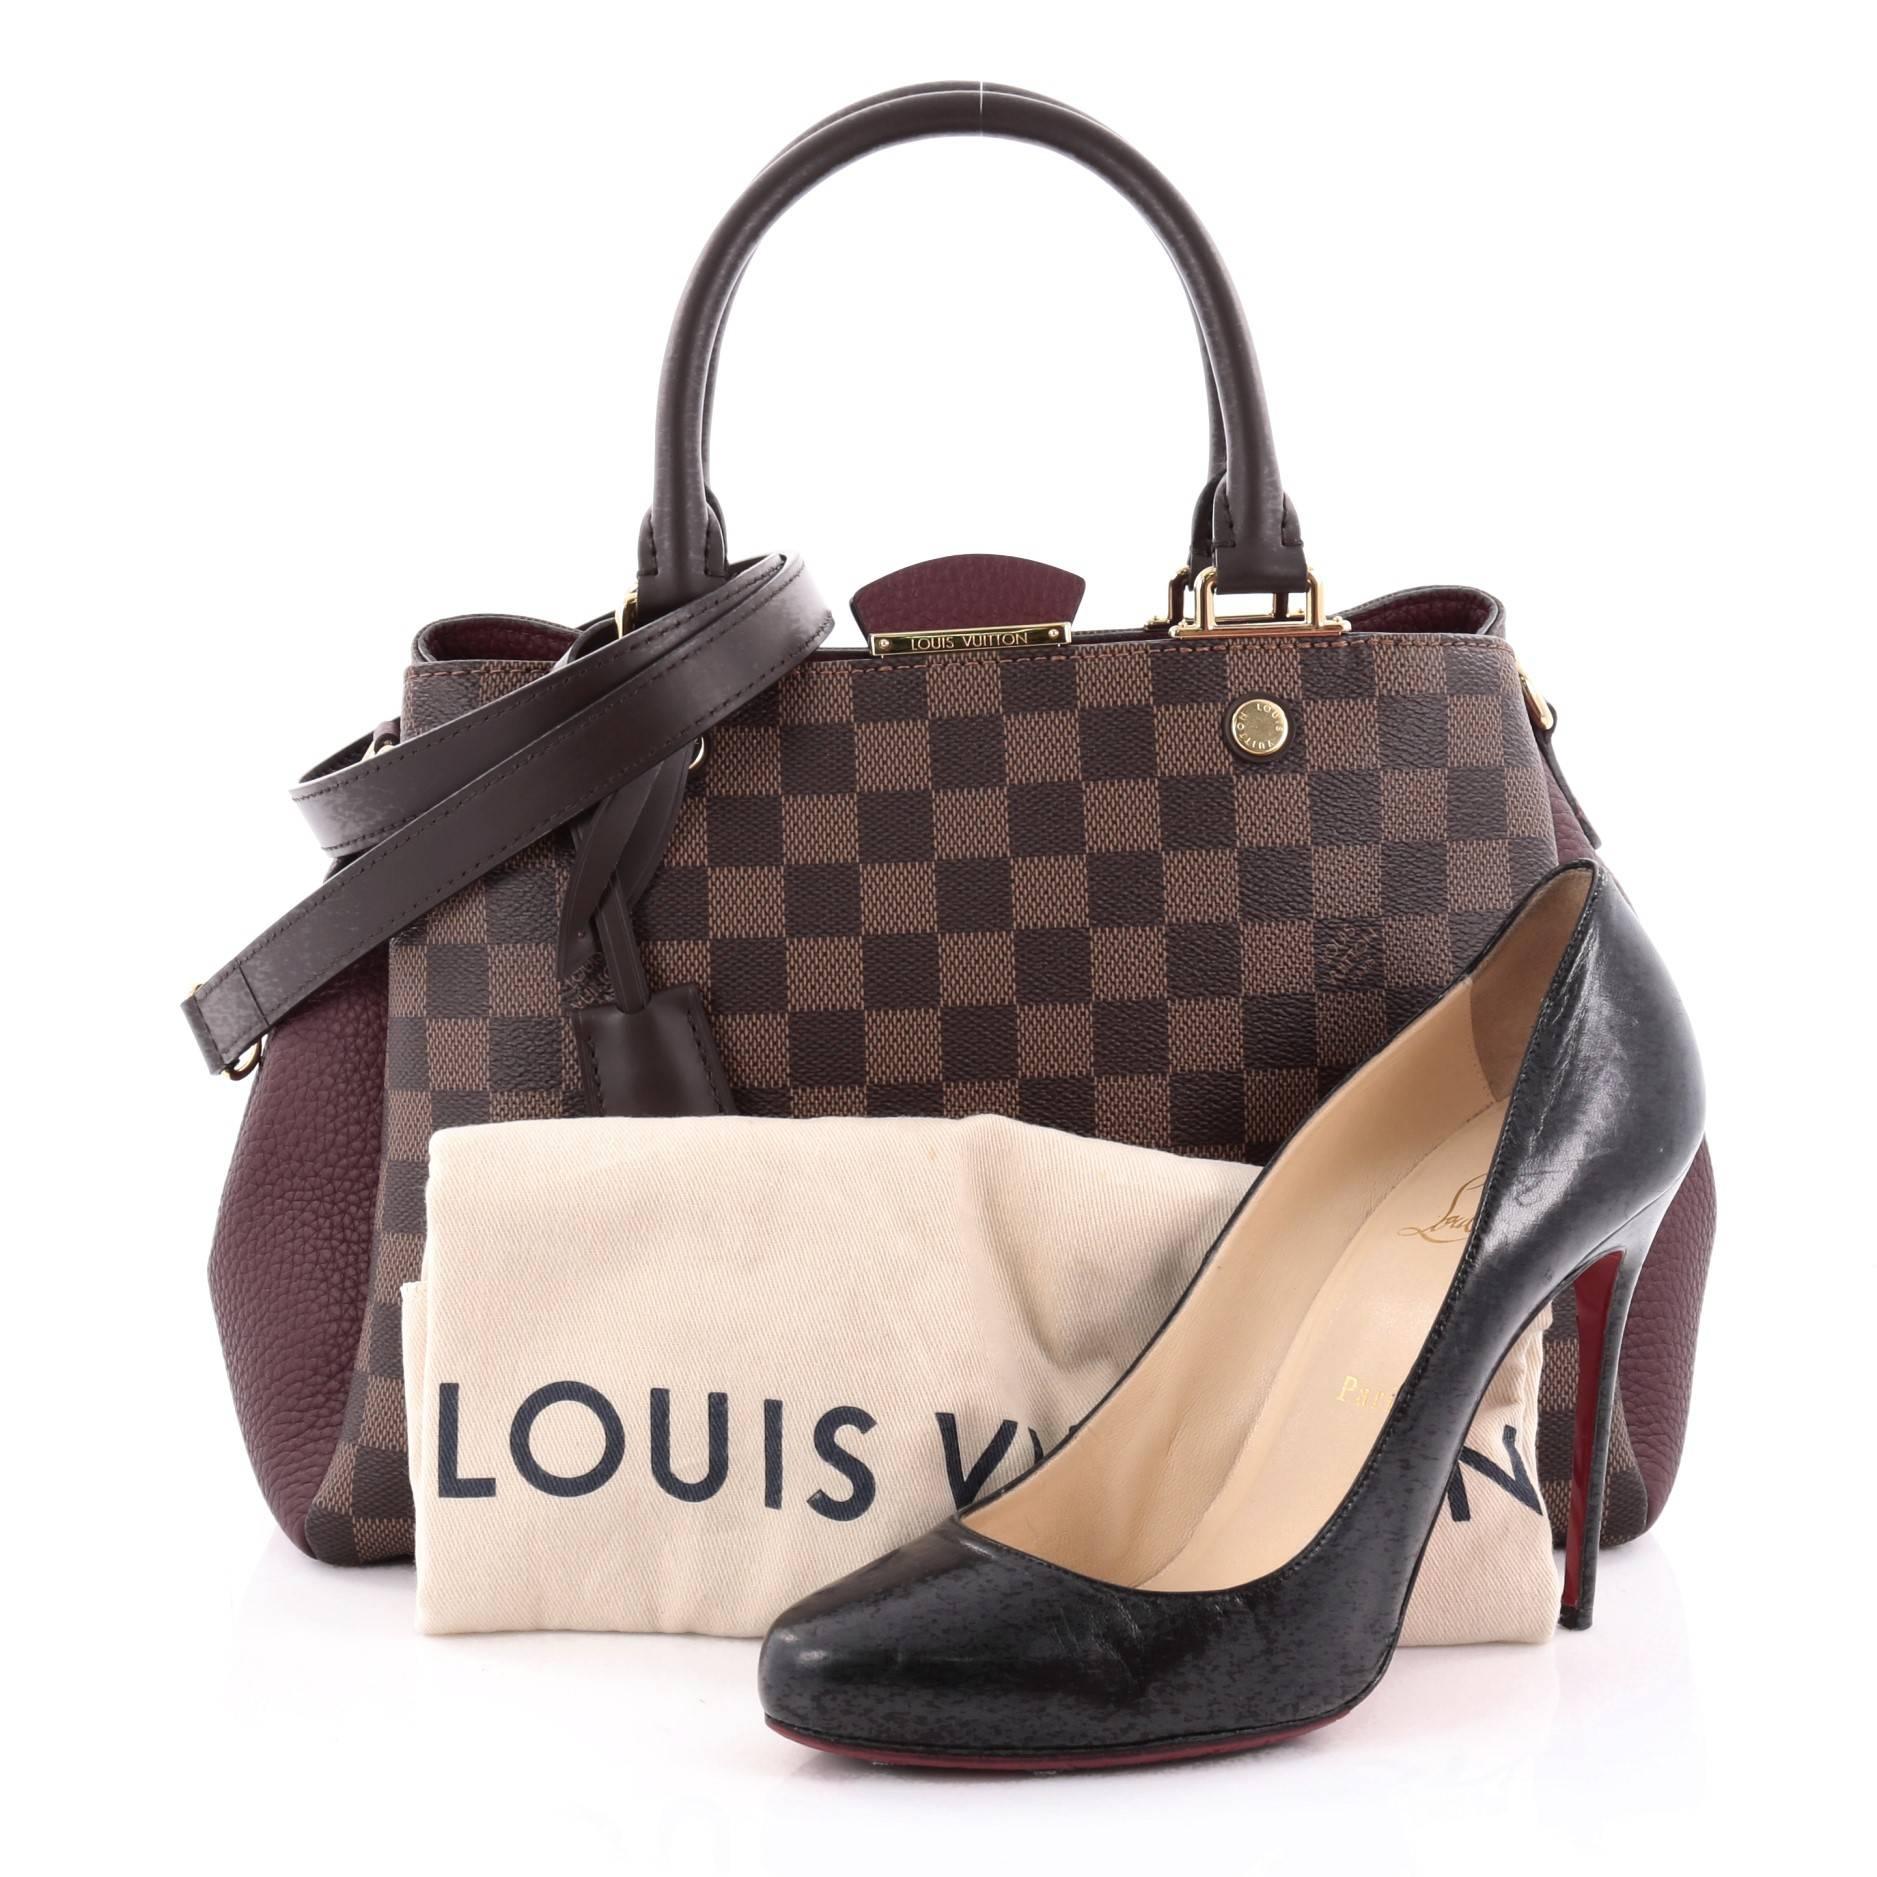 This authentic Louis Vuitton Brittany Handbag Damier makes an elegant statement with its contrast pairing. Crafted from damier ebene coated canvas and maroon Taurillon leather, this sophisticated and feminine bag features dual-rolled leather